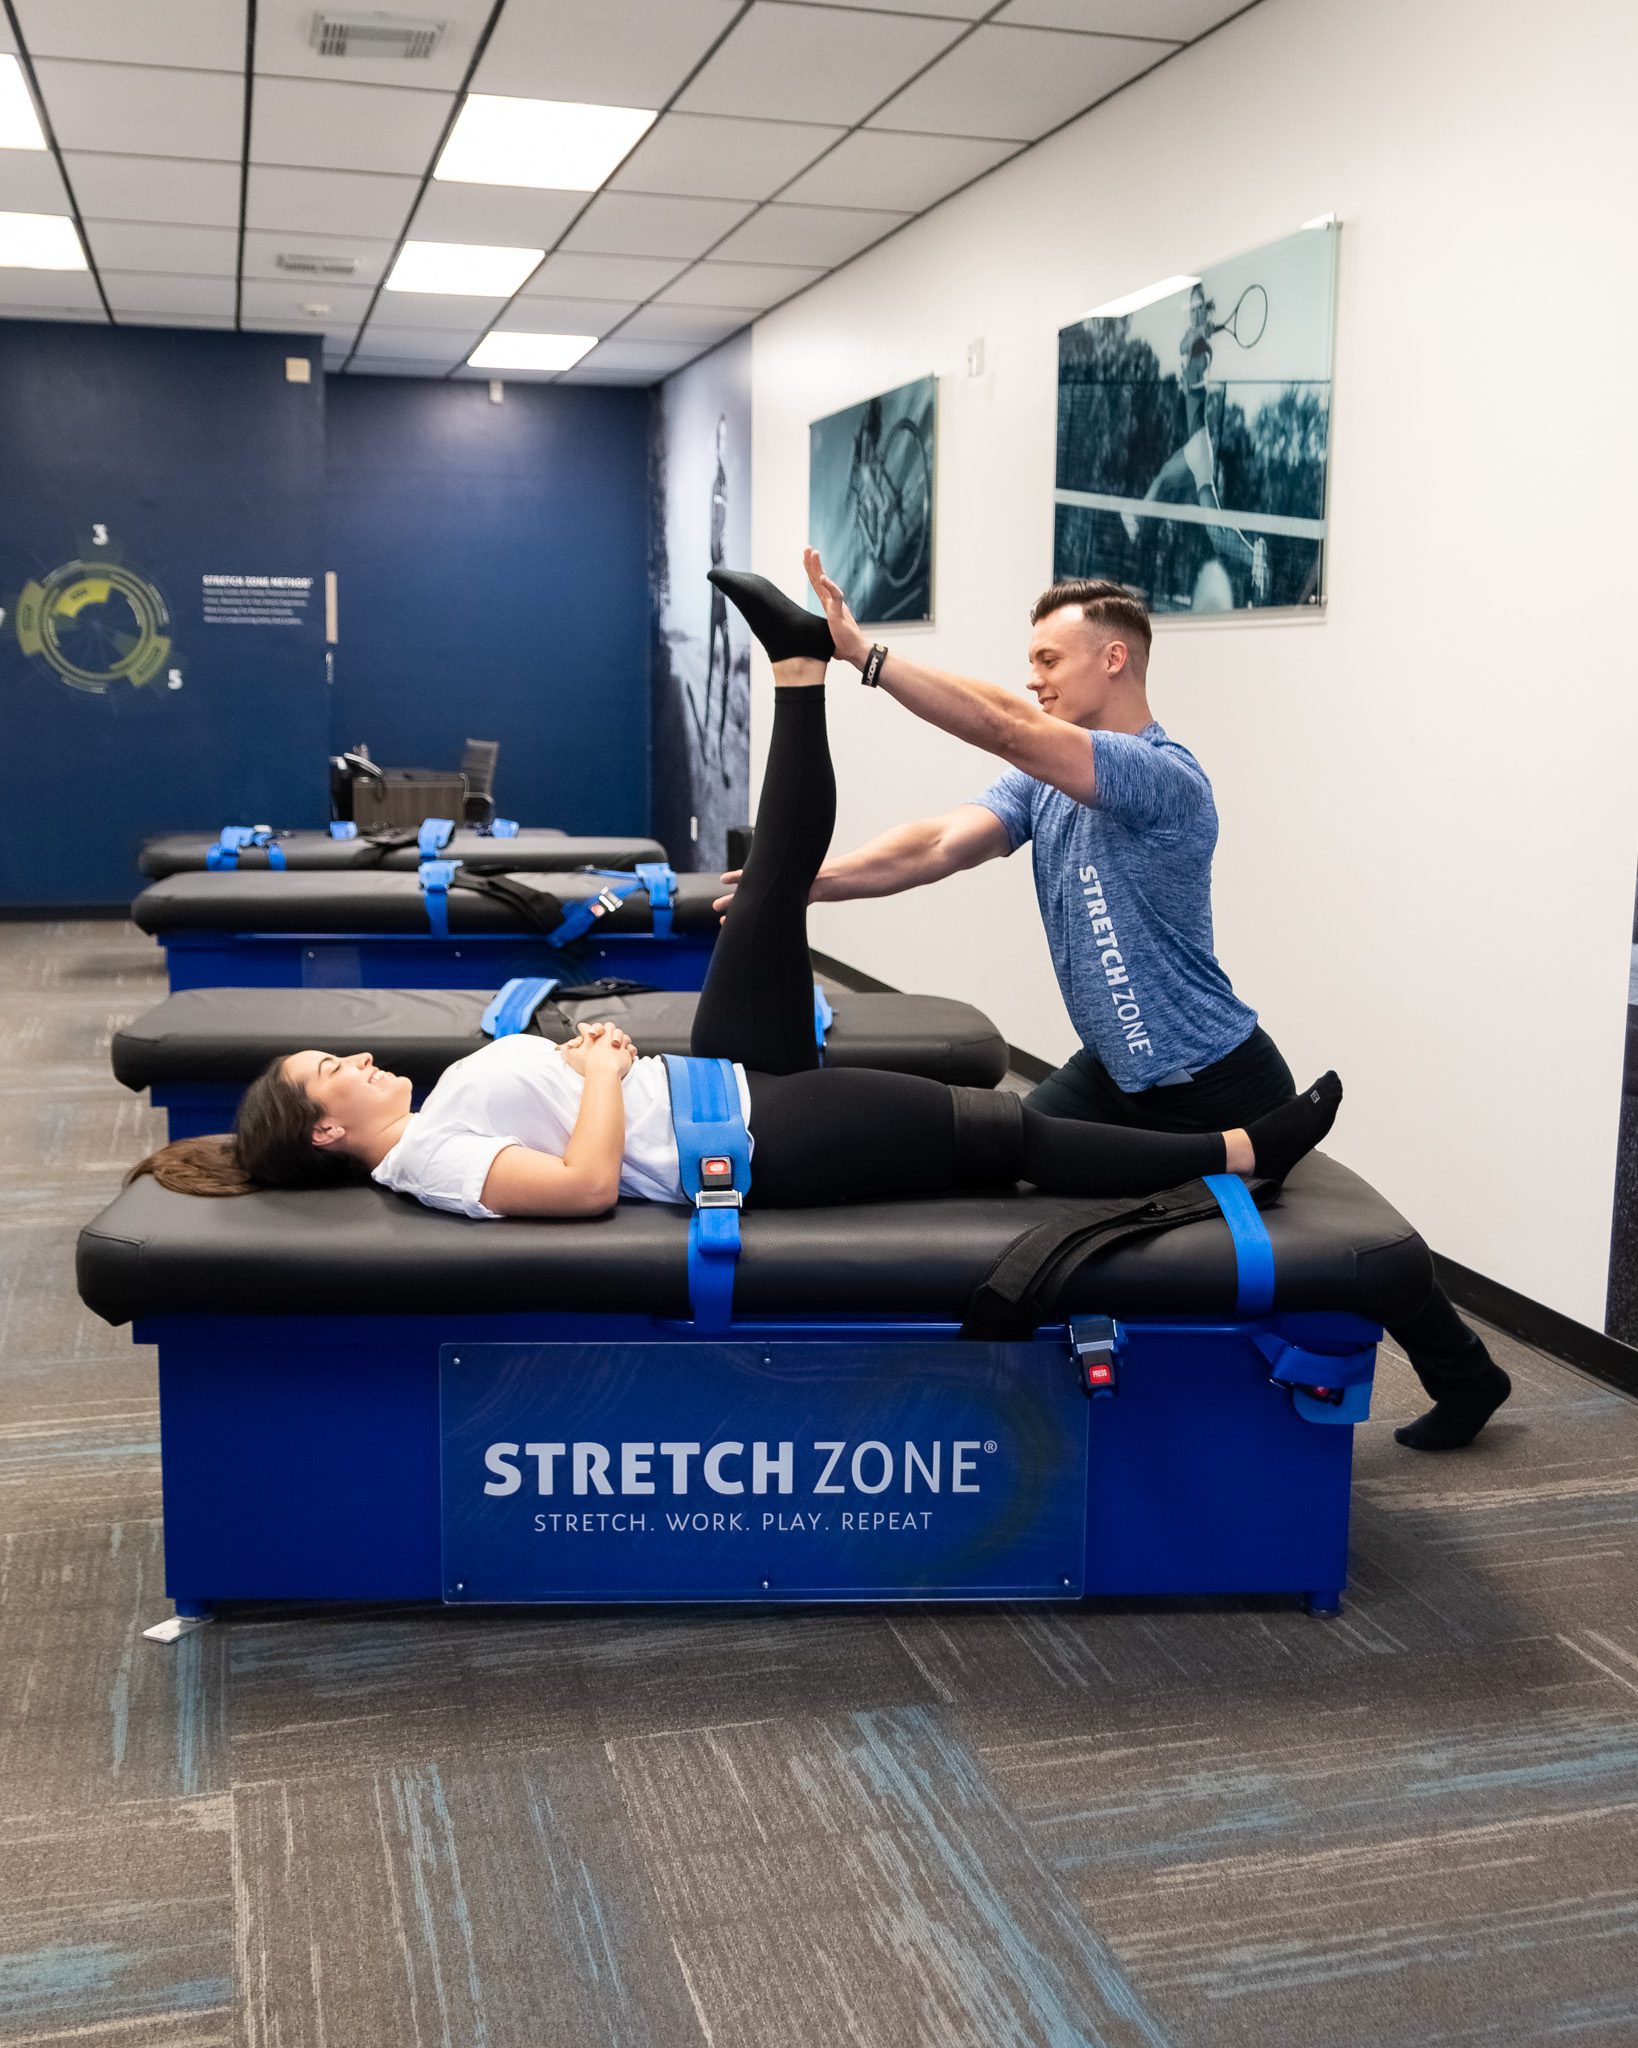 What Is a Stretch Studio? Here's What You Need to Know About This